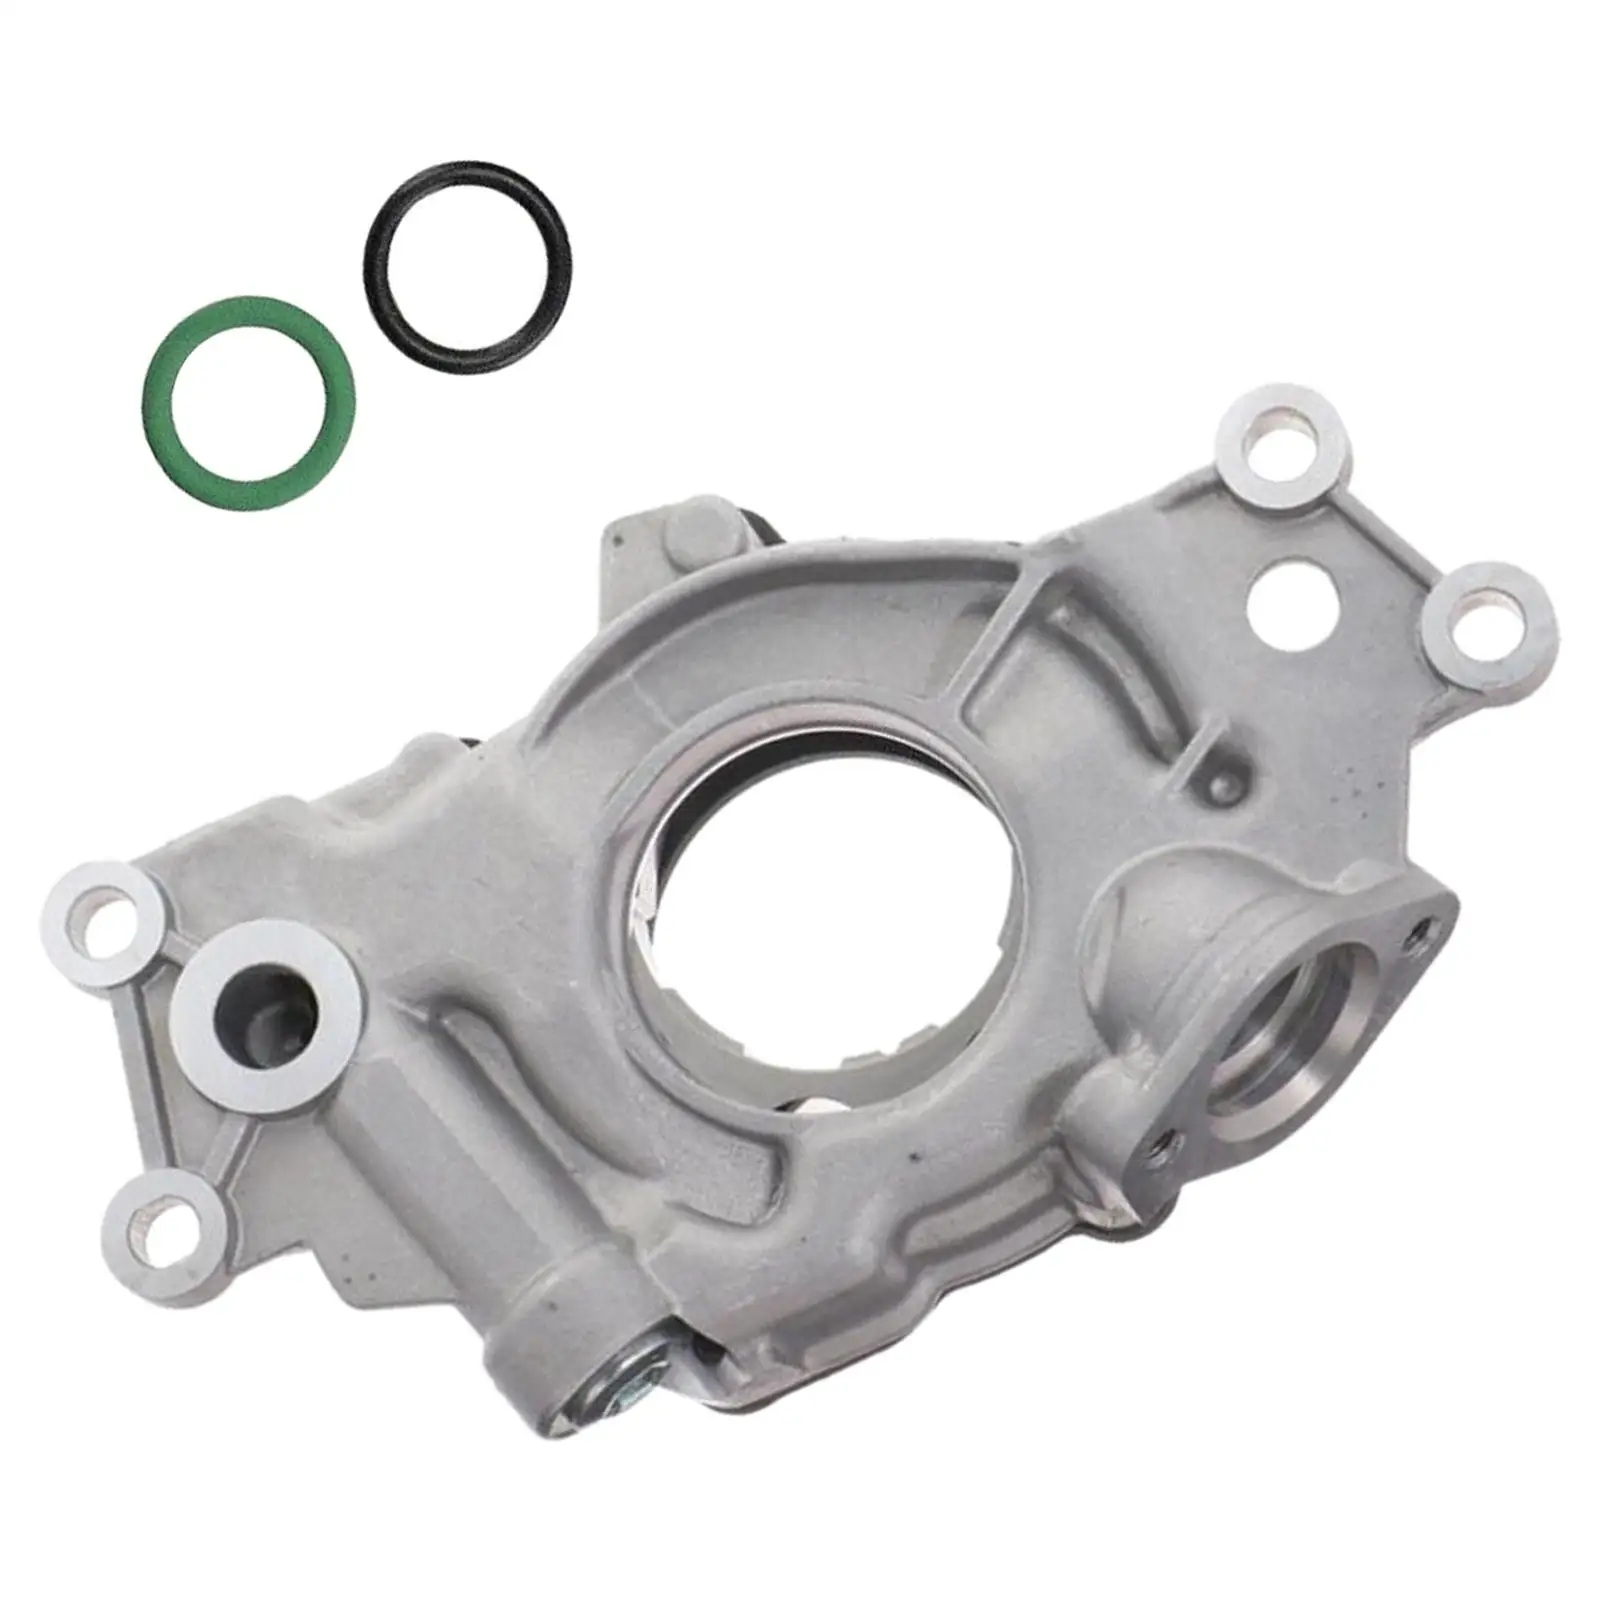 Oil Pump Alloy Replacement Easy to Install Professional High Performance High Volume Oil Pumps for LC9 L99 L92 L9H L76